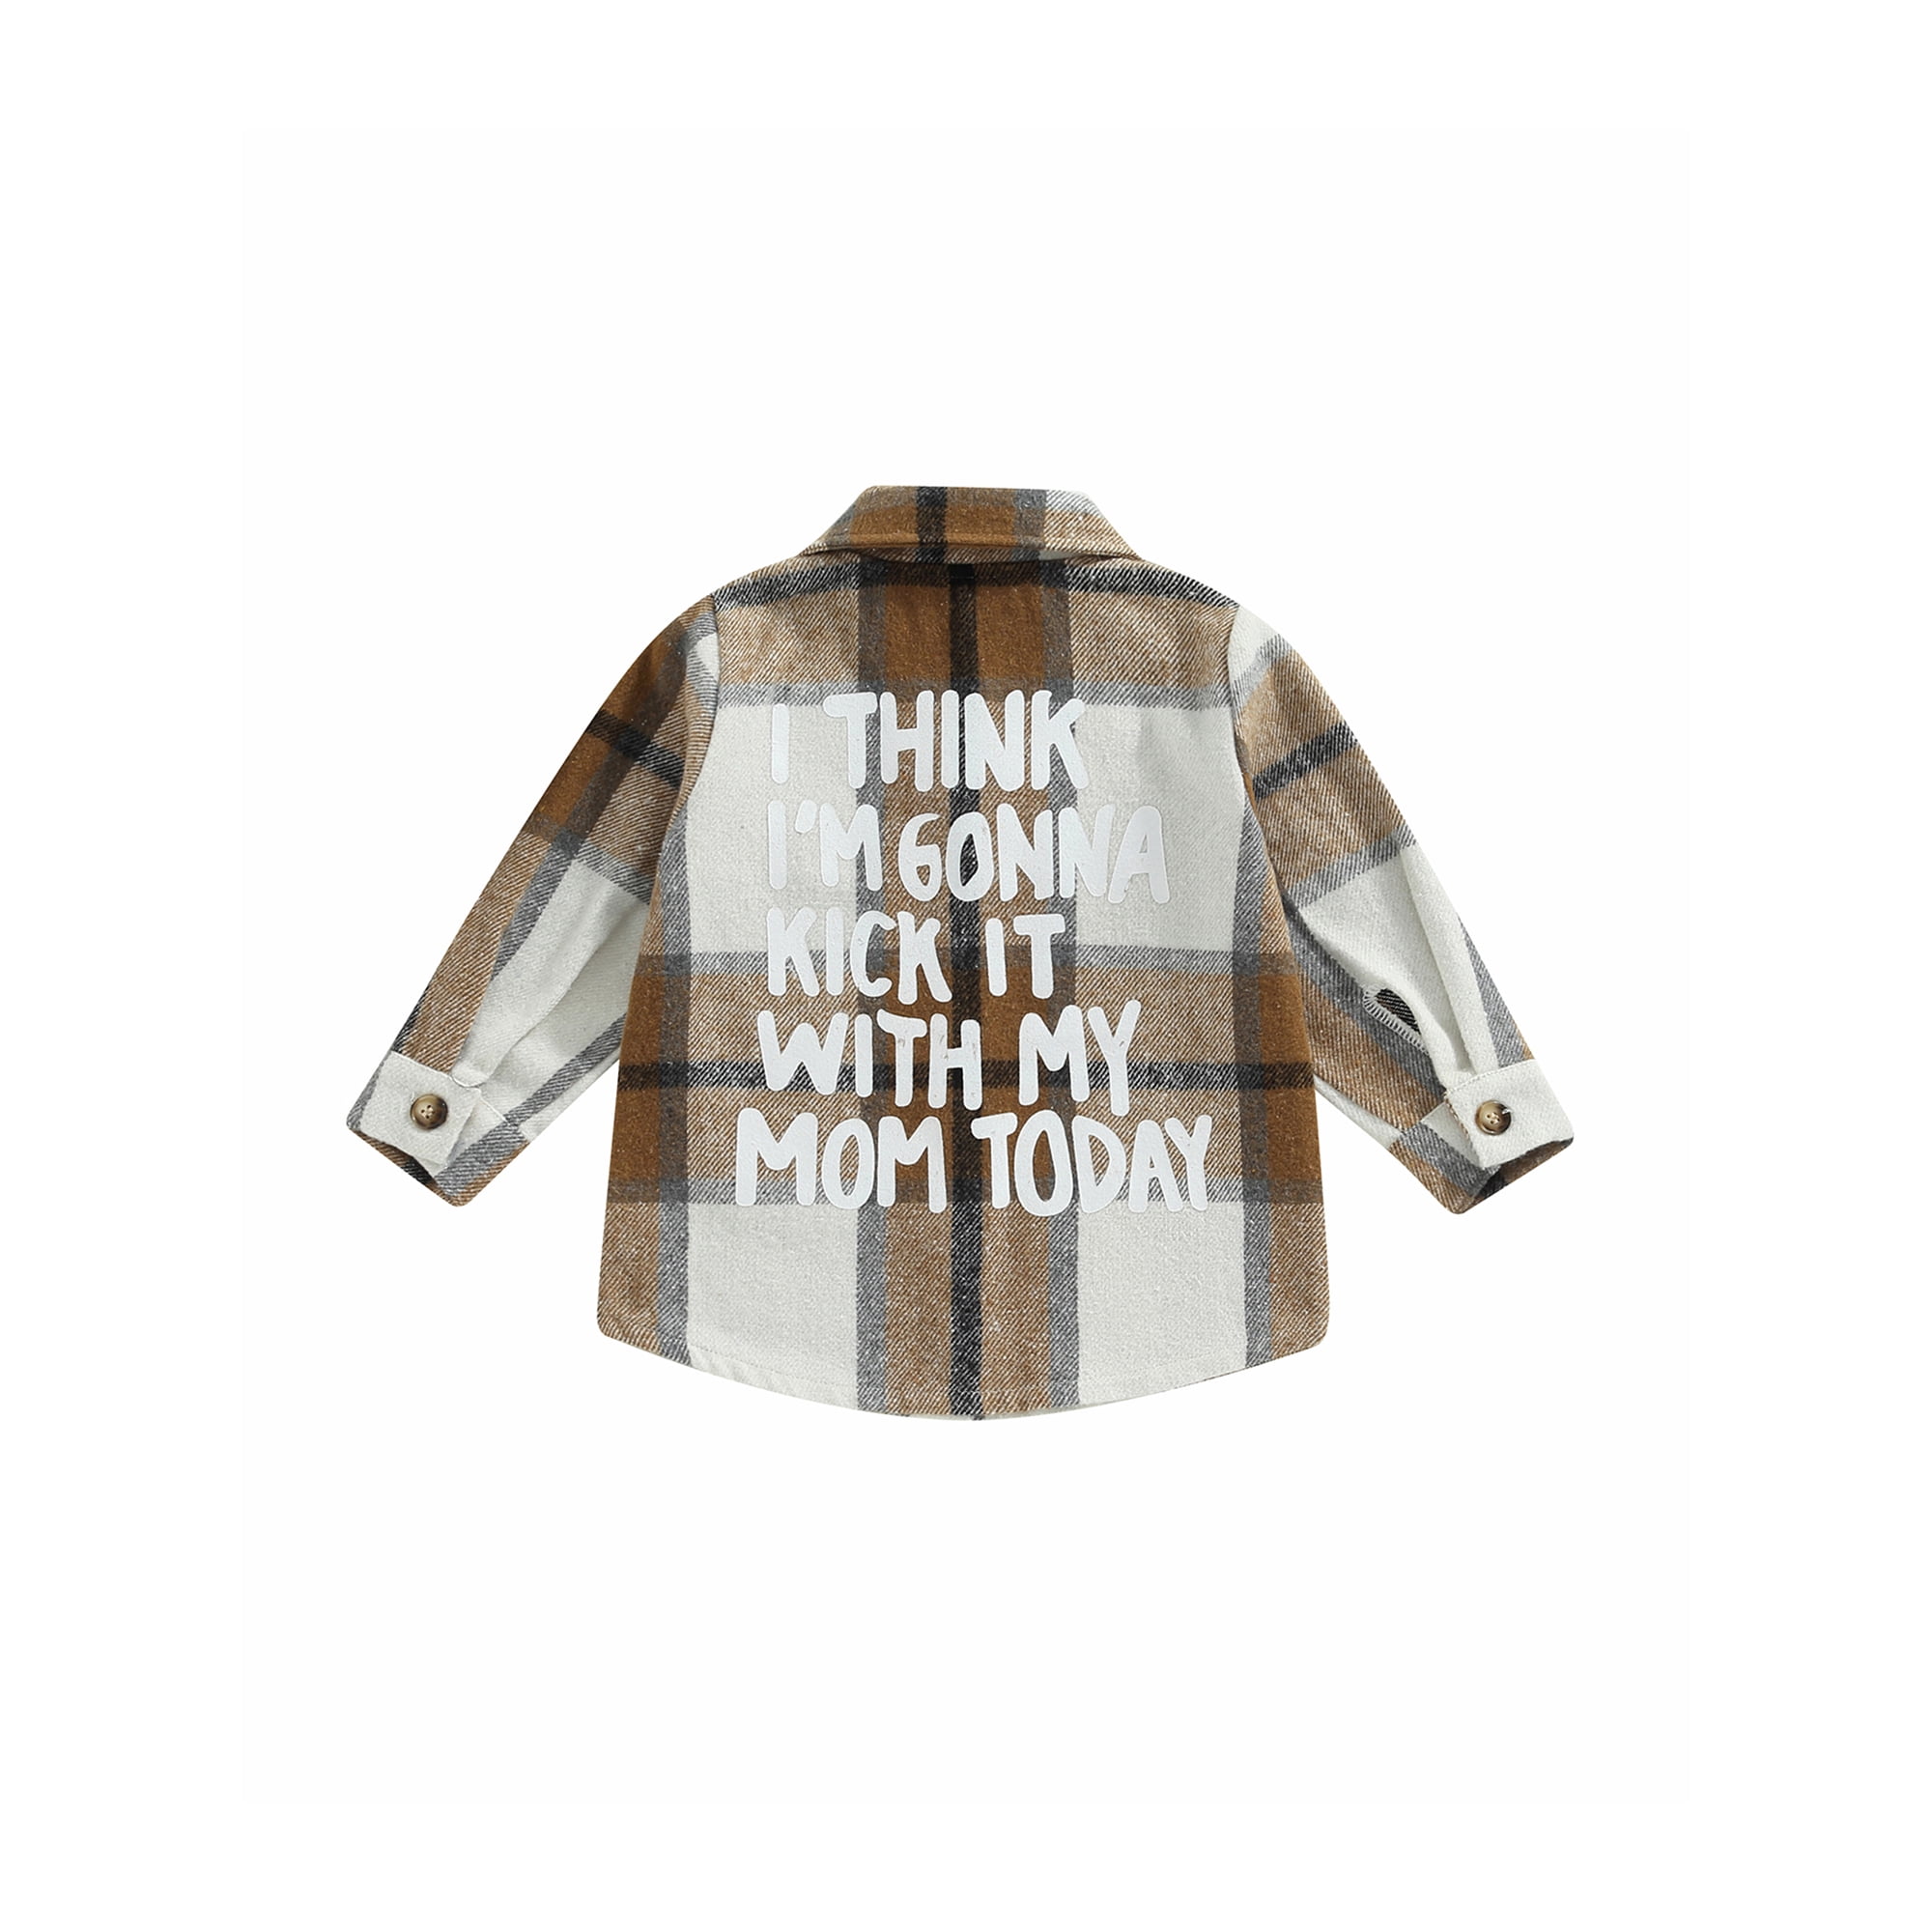 Wybzd Toddler Baby Boys Girls Flannel Plaid Shirts Long Sleeve Lepel Button Down Back Letters Print Coat Tops Outwear Brown 1-2 Years, Infant Unisex